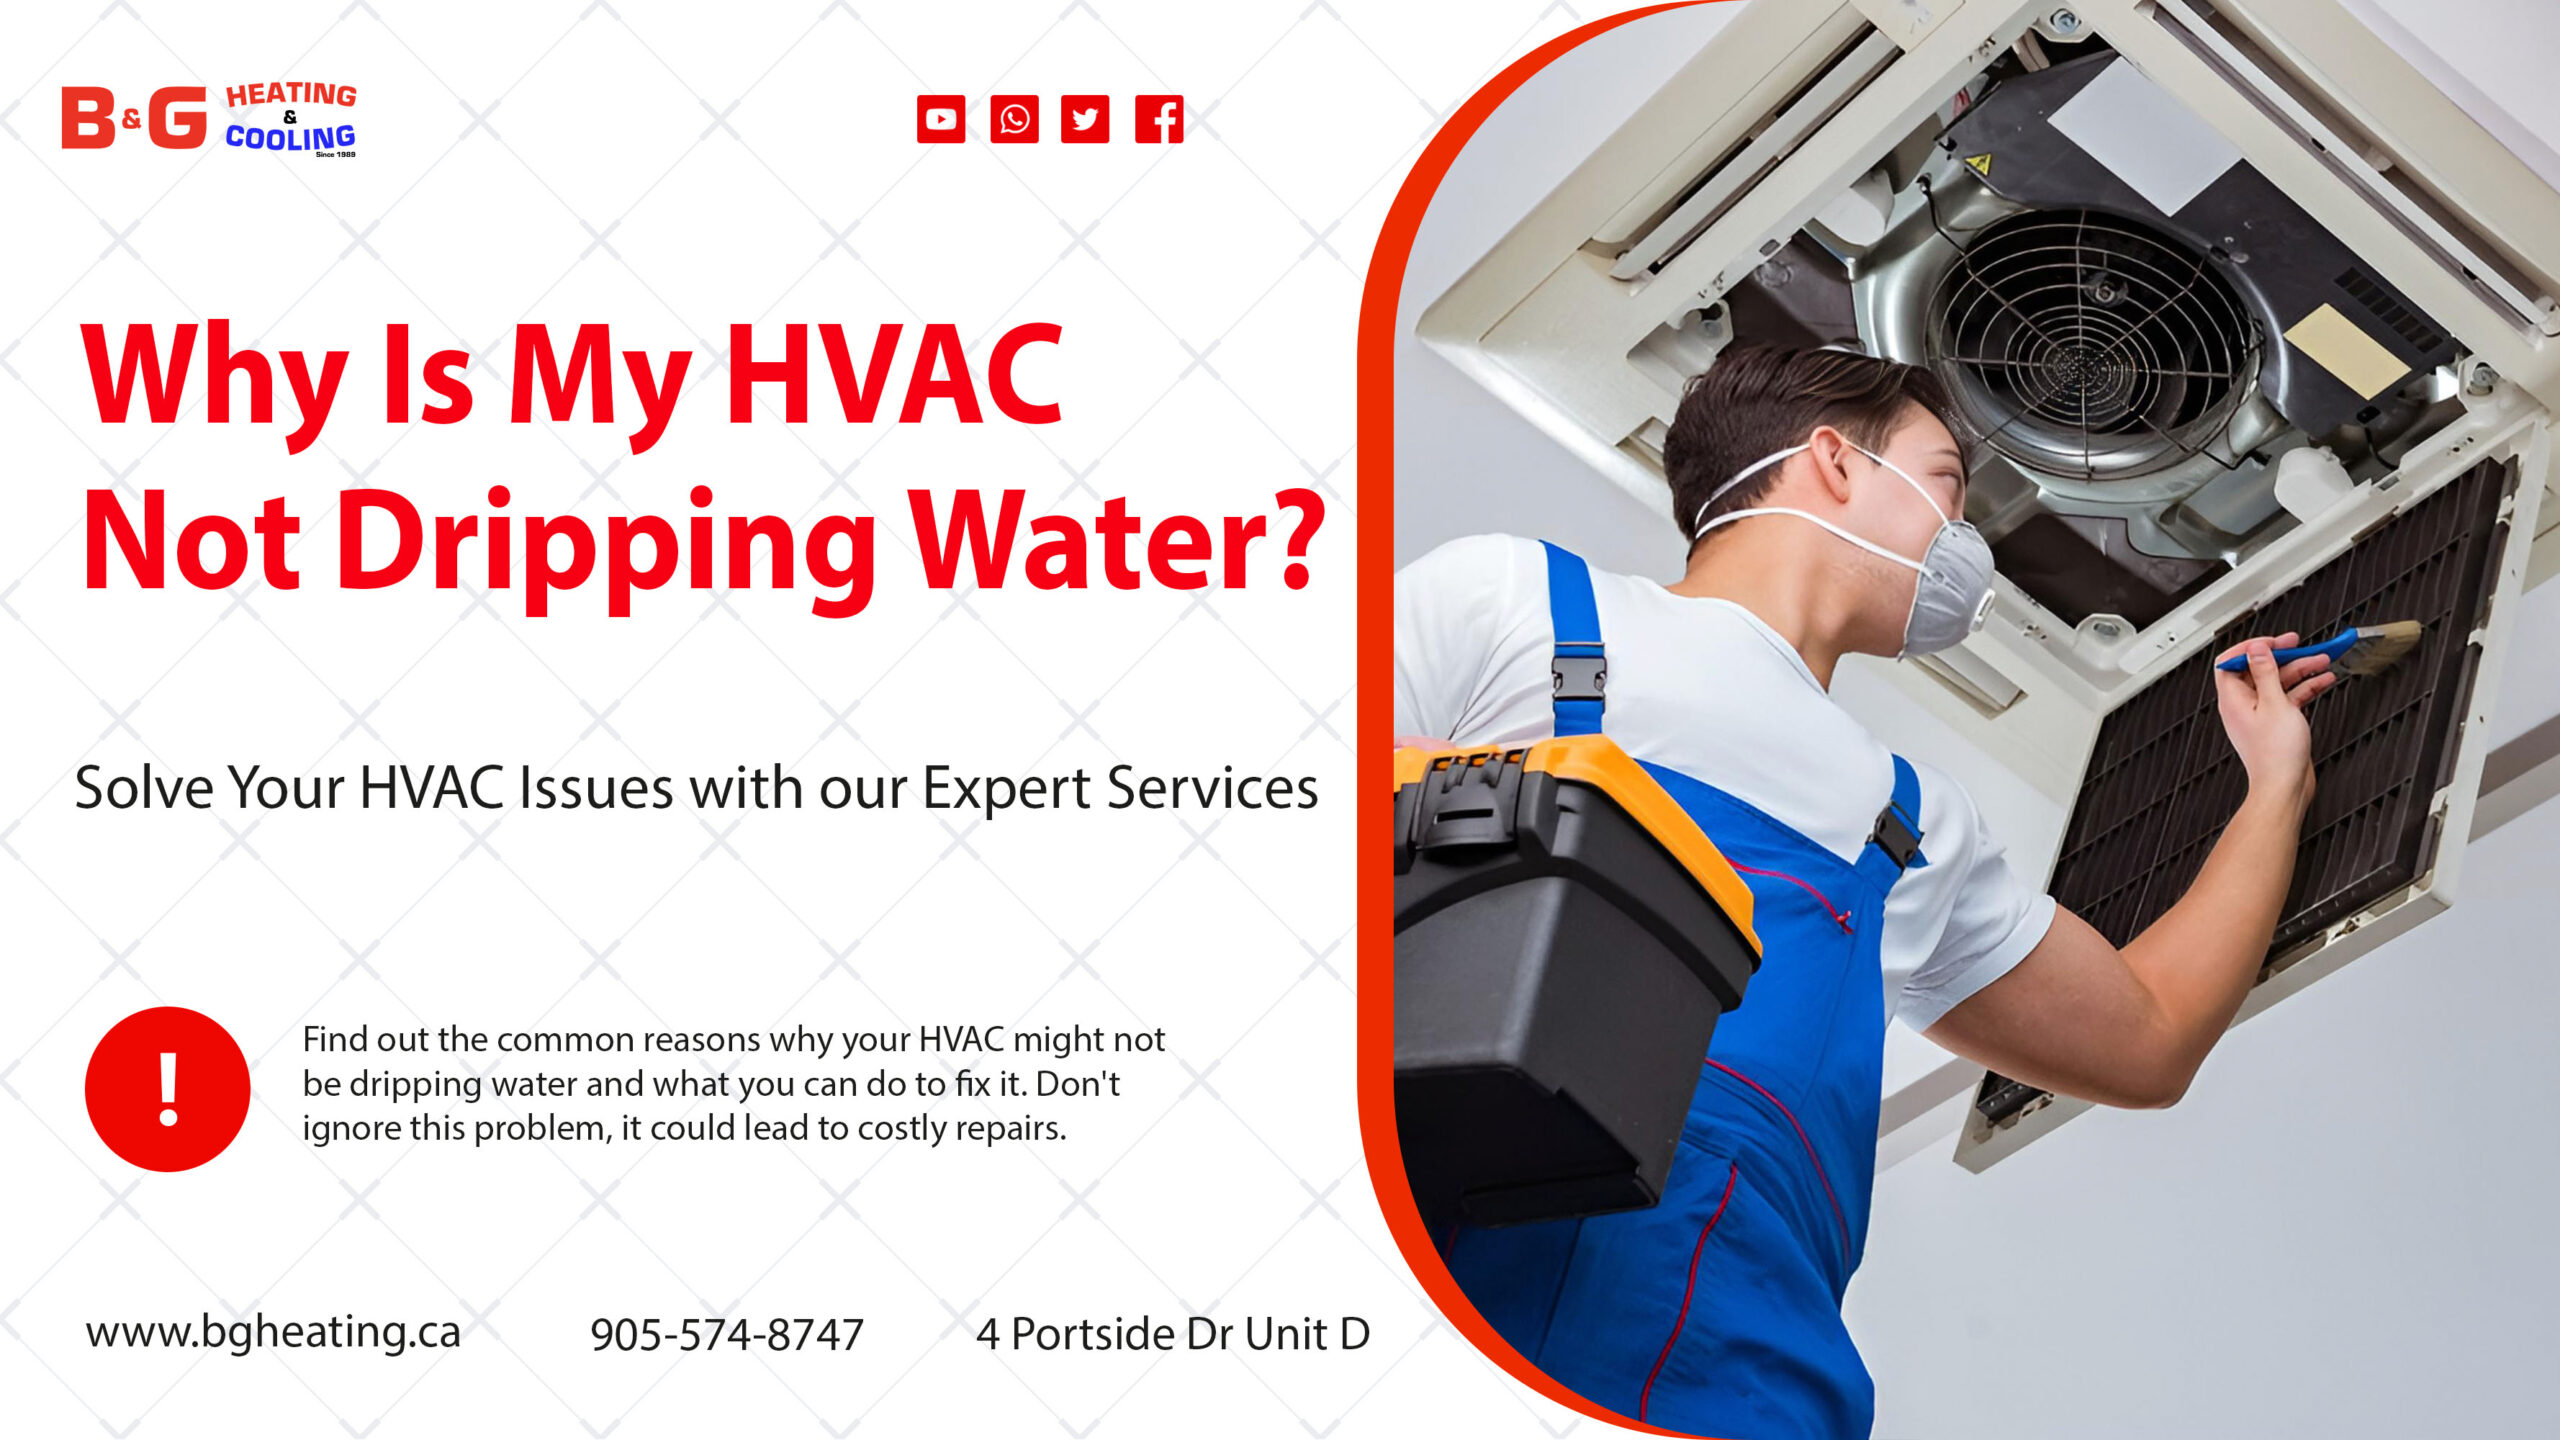 Why Is My HVAC Not Dripping Water?